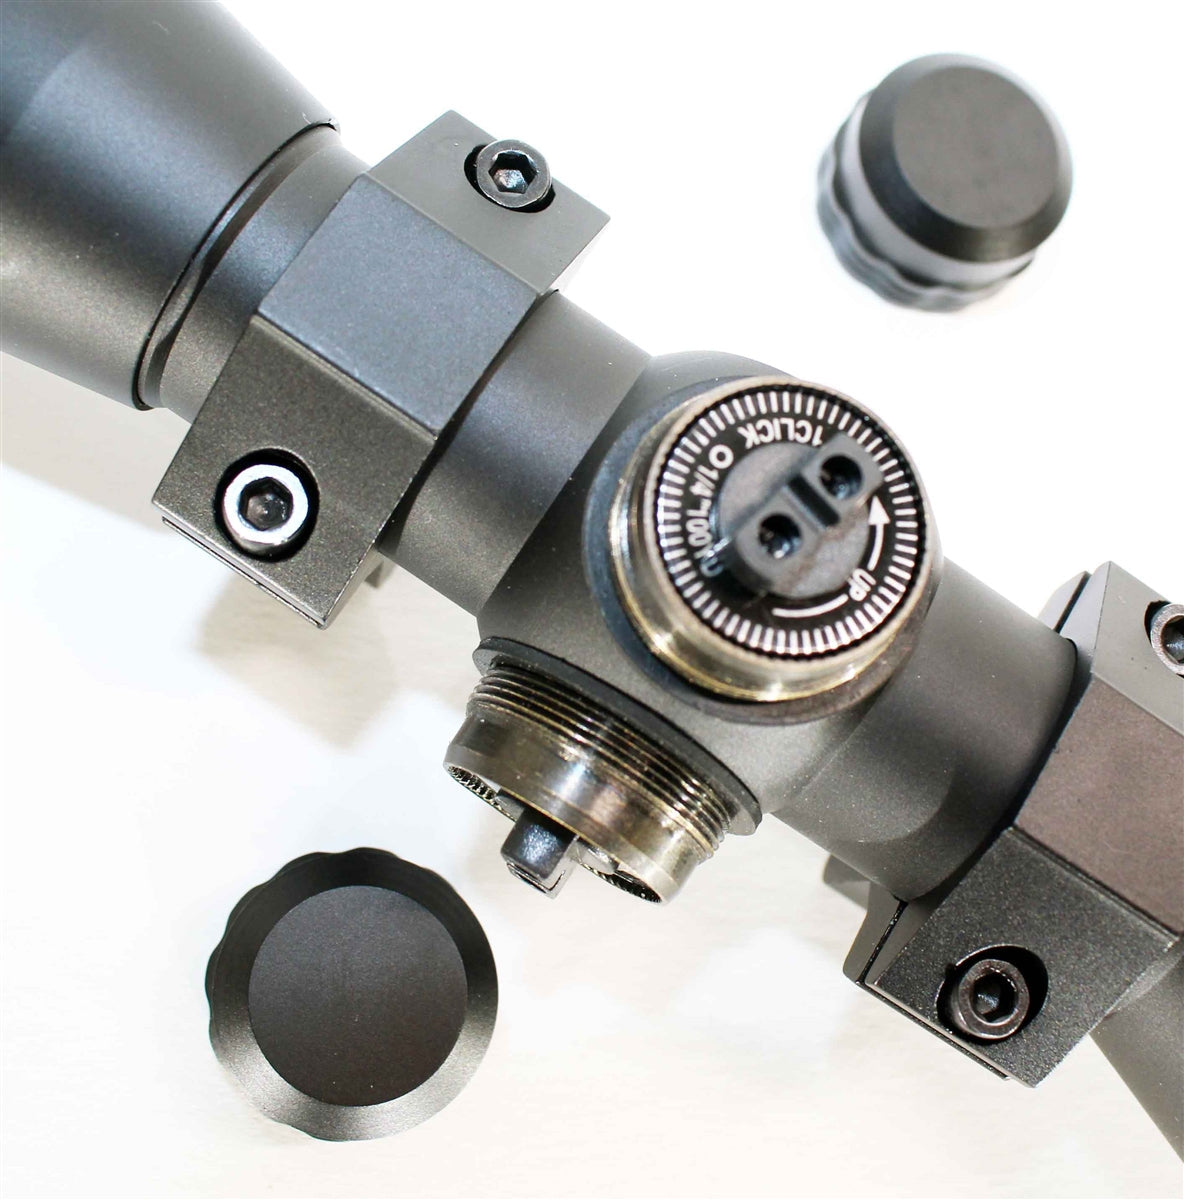 Tactical 4x32 Mil-Dot Reticle Scope With Base Mount Compatible With Mossberg 500 12 Gauge Pumps.